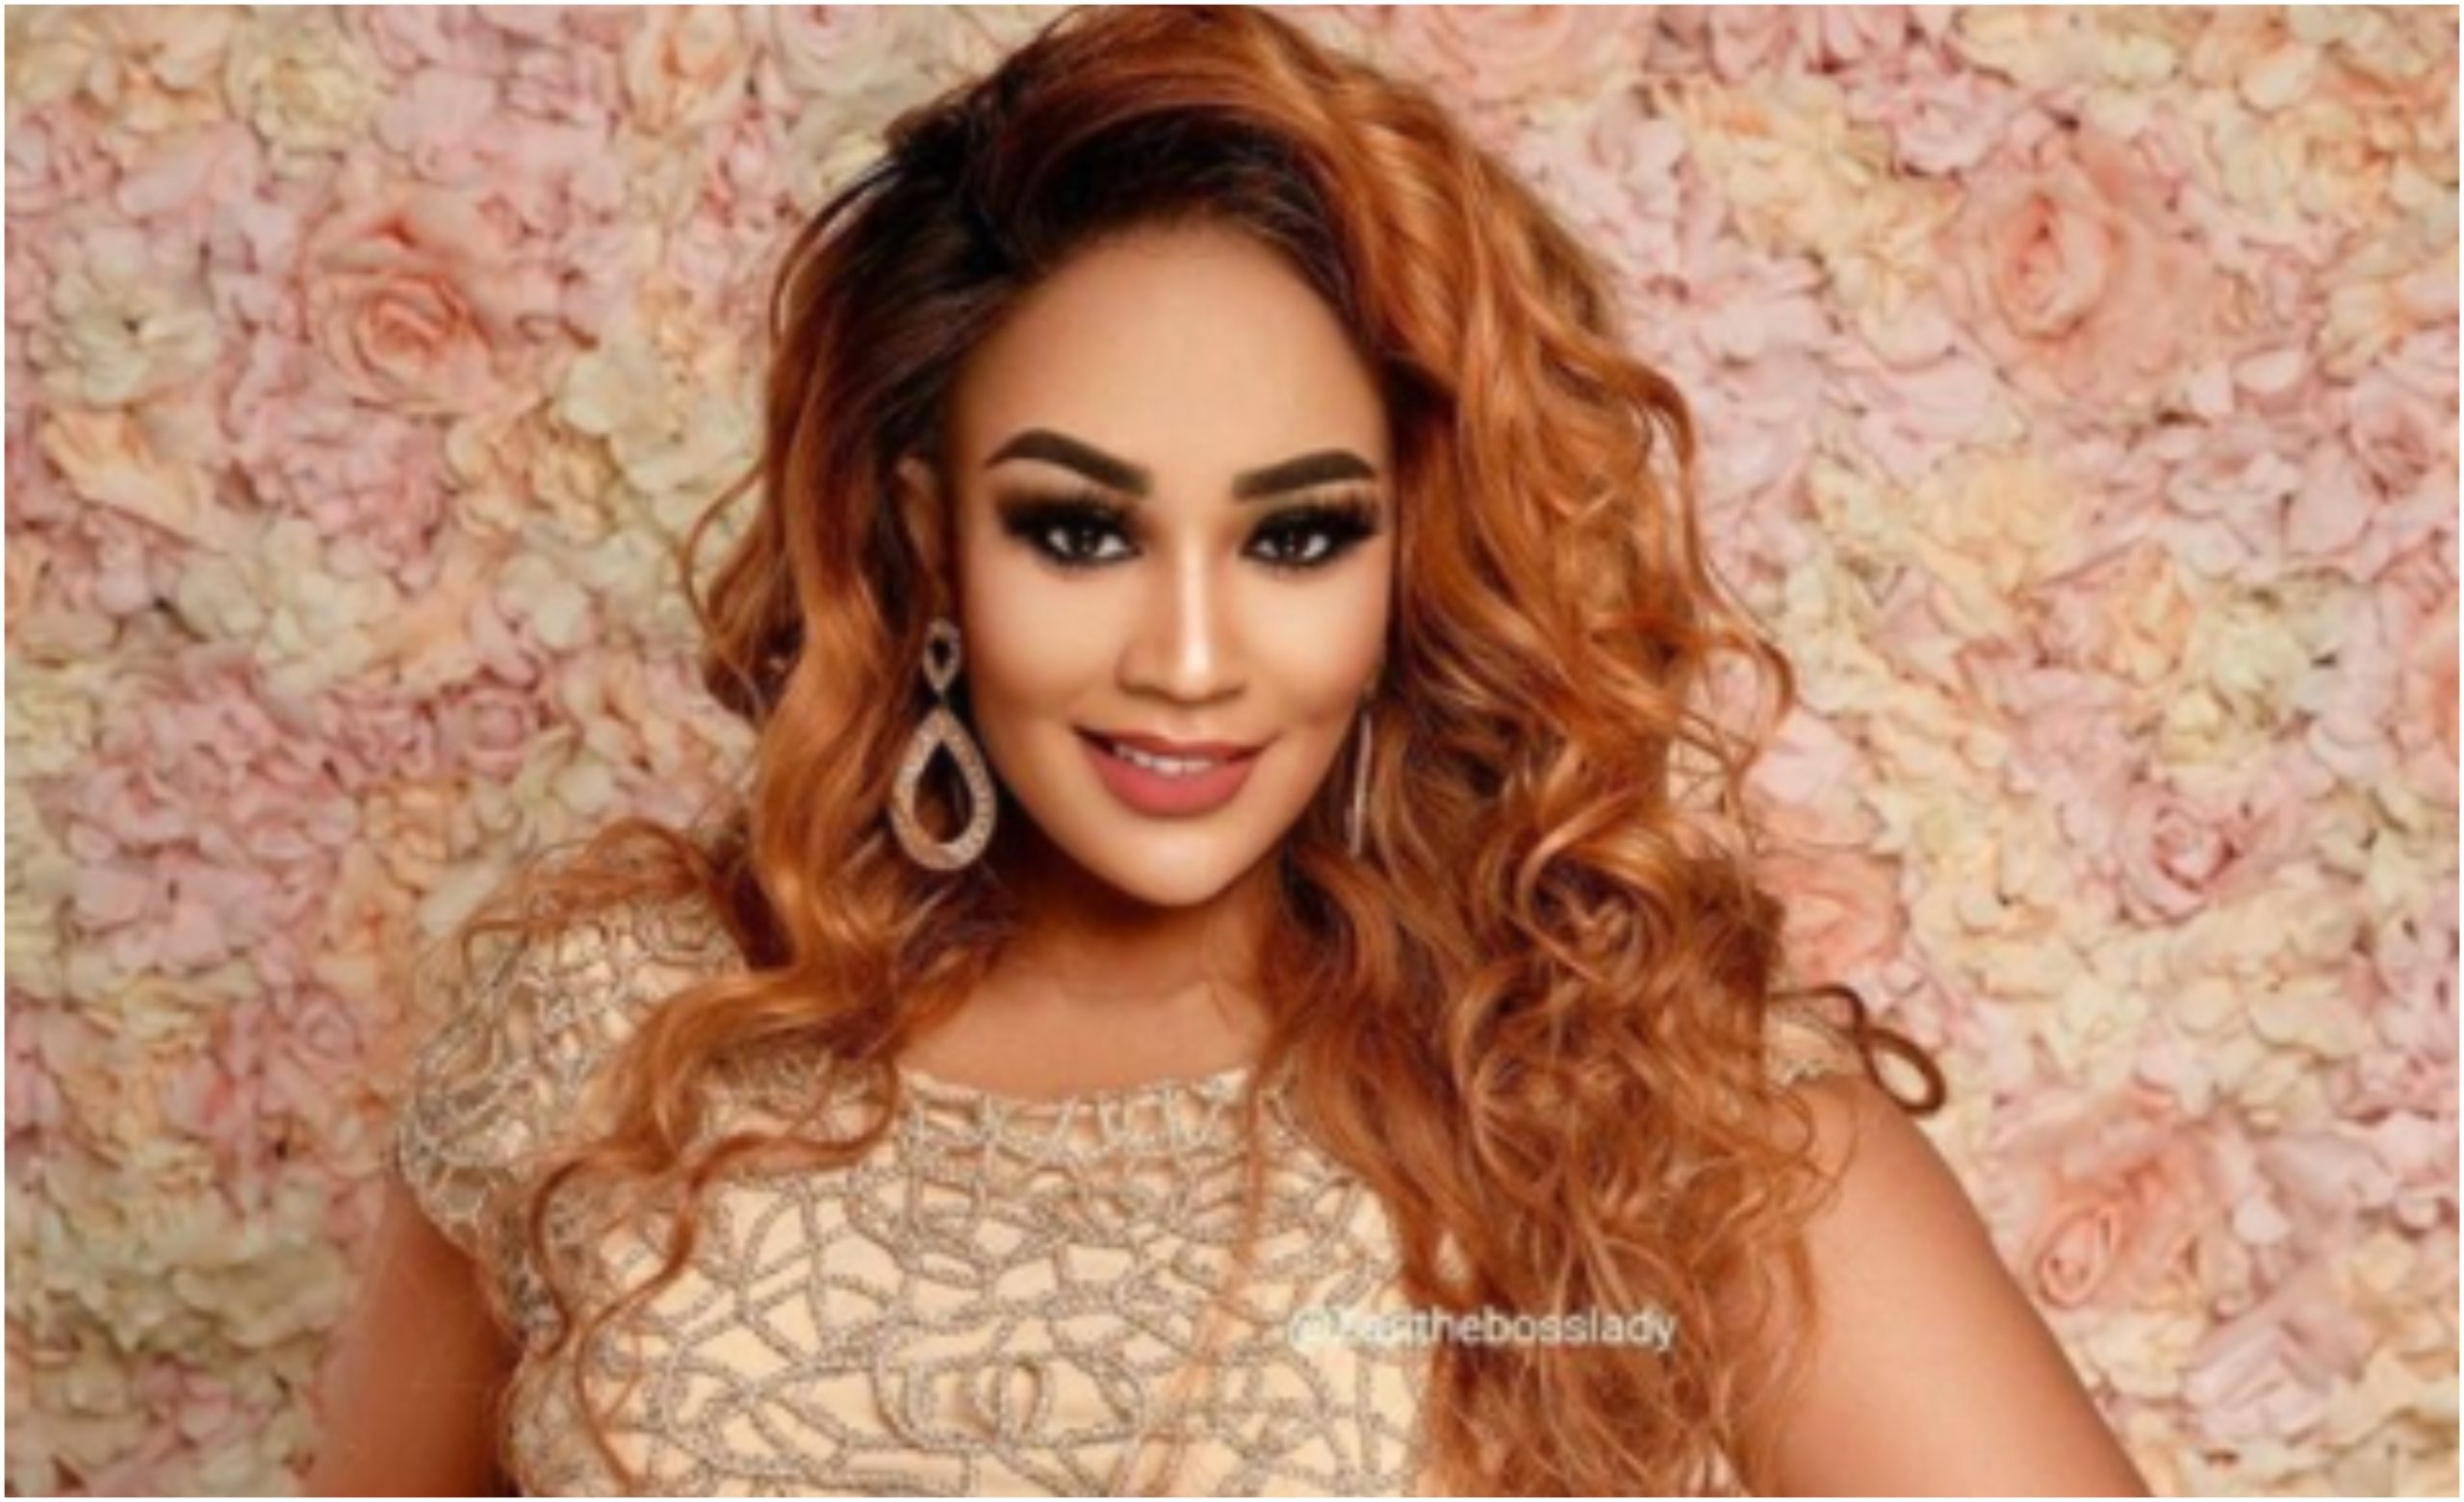 Zari Hassan comes clean about baby daddy allegedly kicking her out of the South African mansion